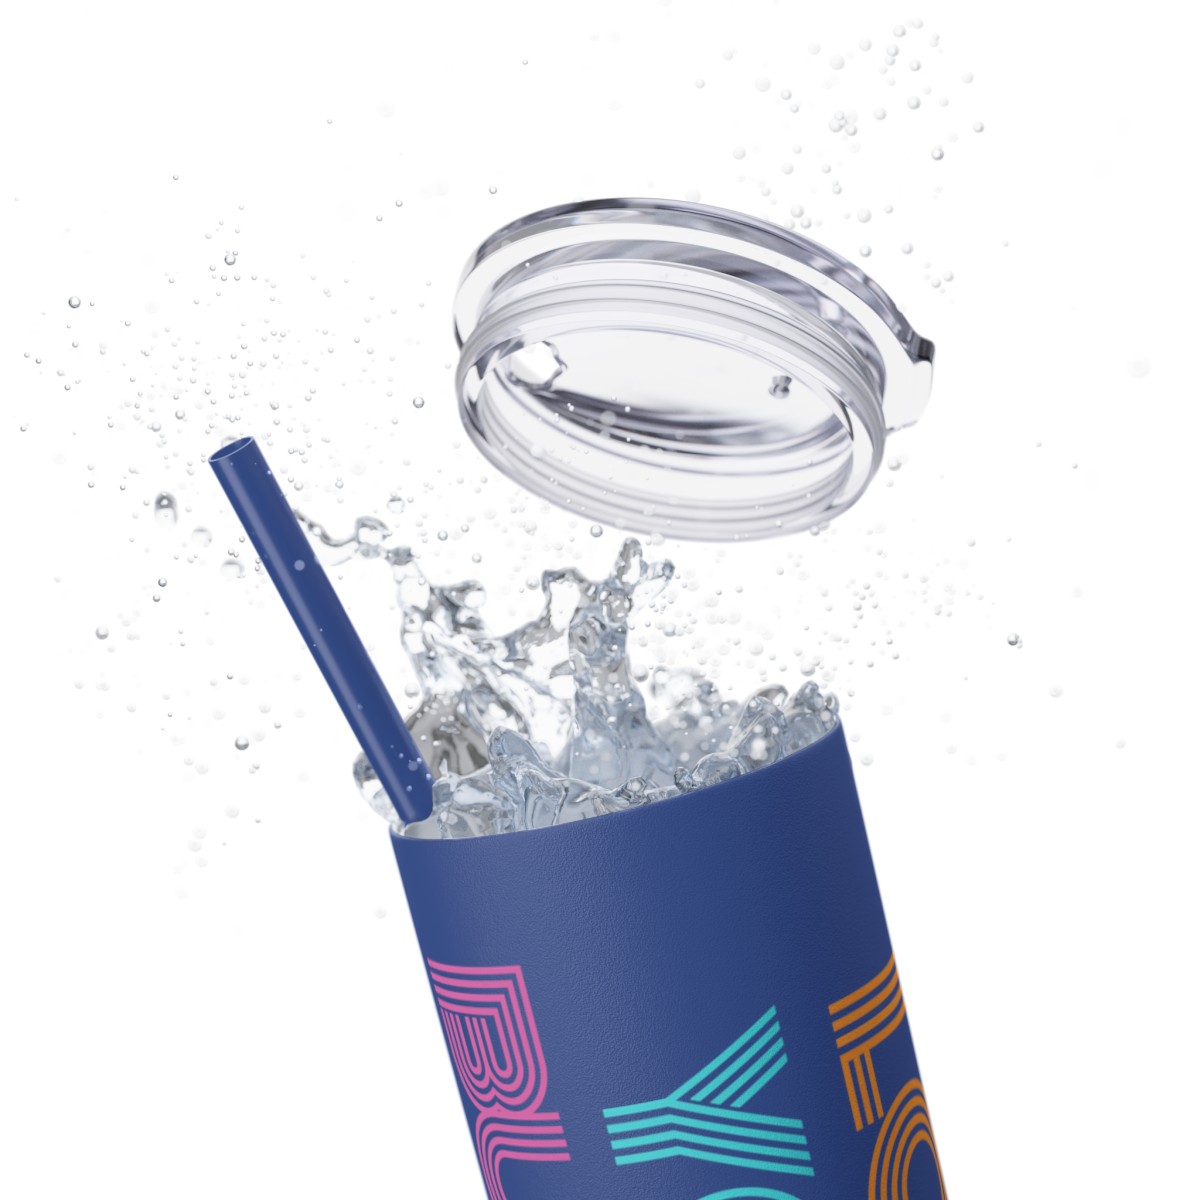 Love Your Business Skinny Tumbler with Straw, 20oz product thumbnail image